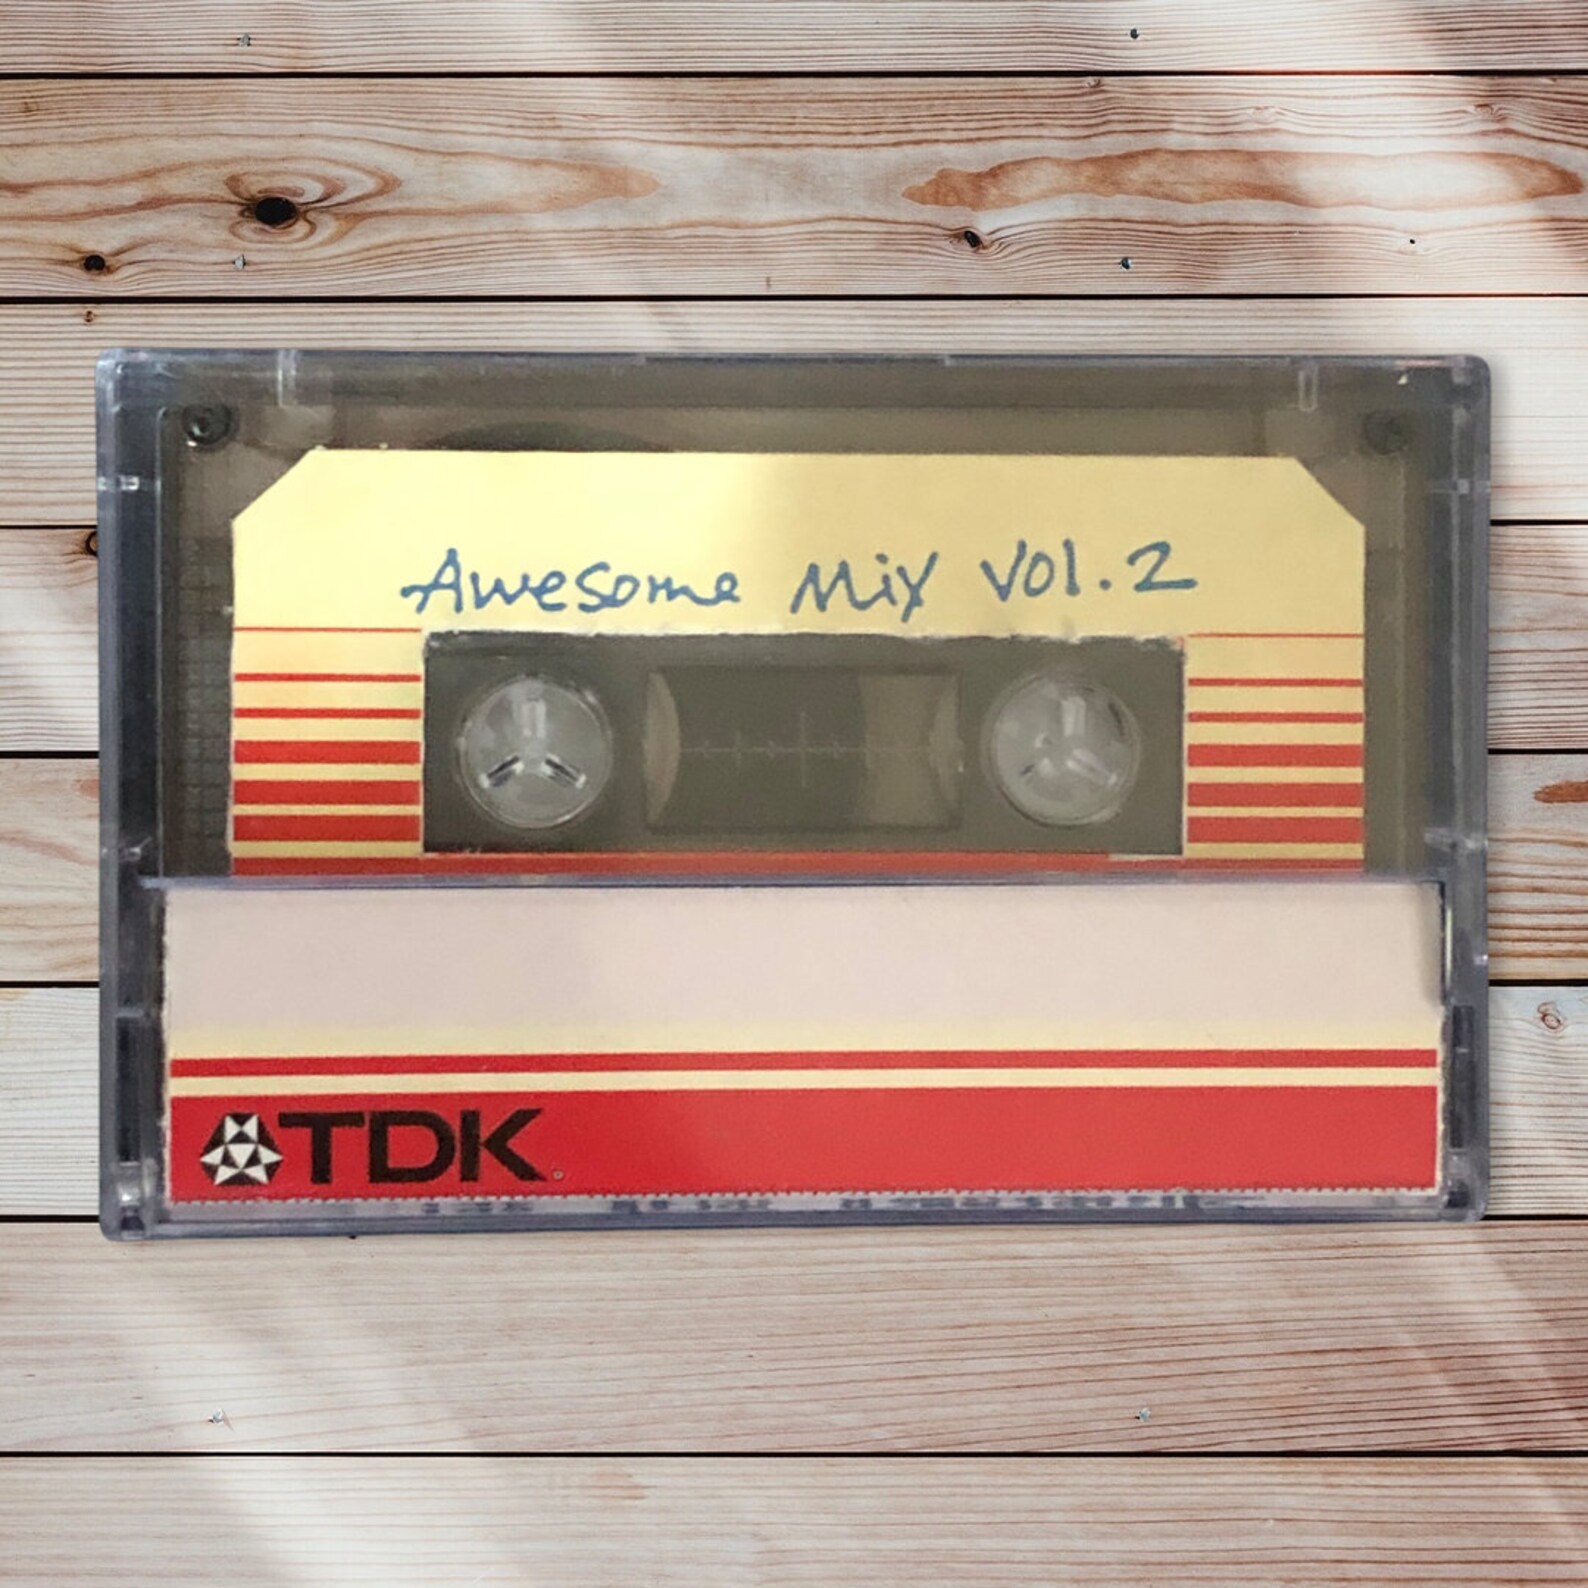 Awesome Mix Vol. 2 Cassette Tape Cassette Music - Etsy